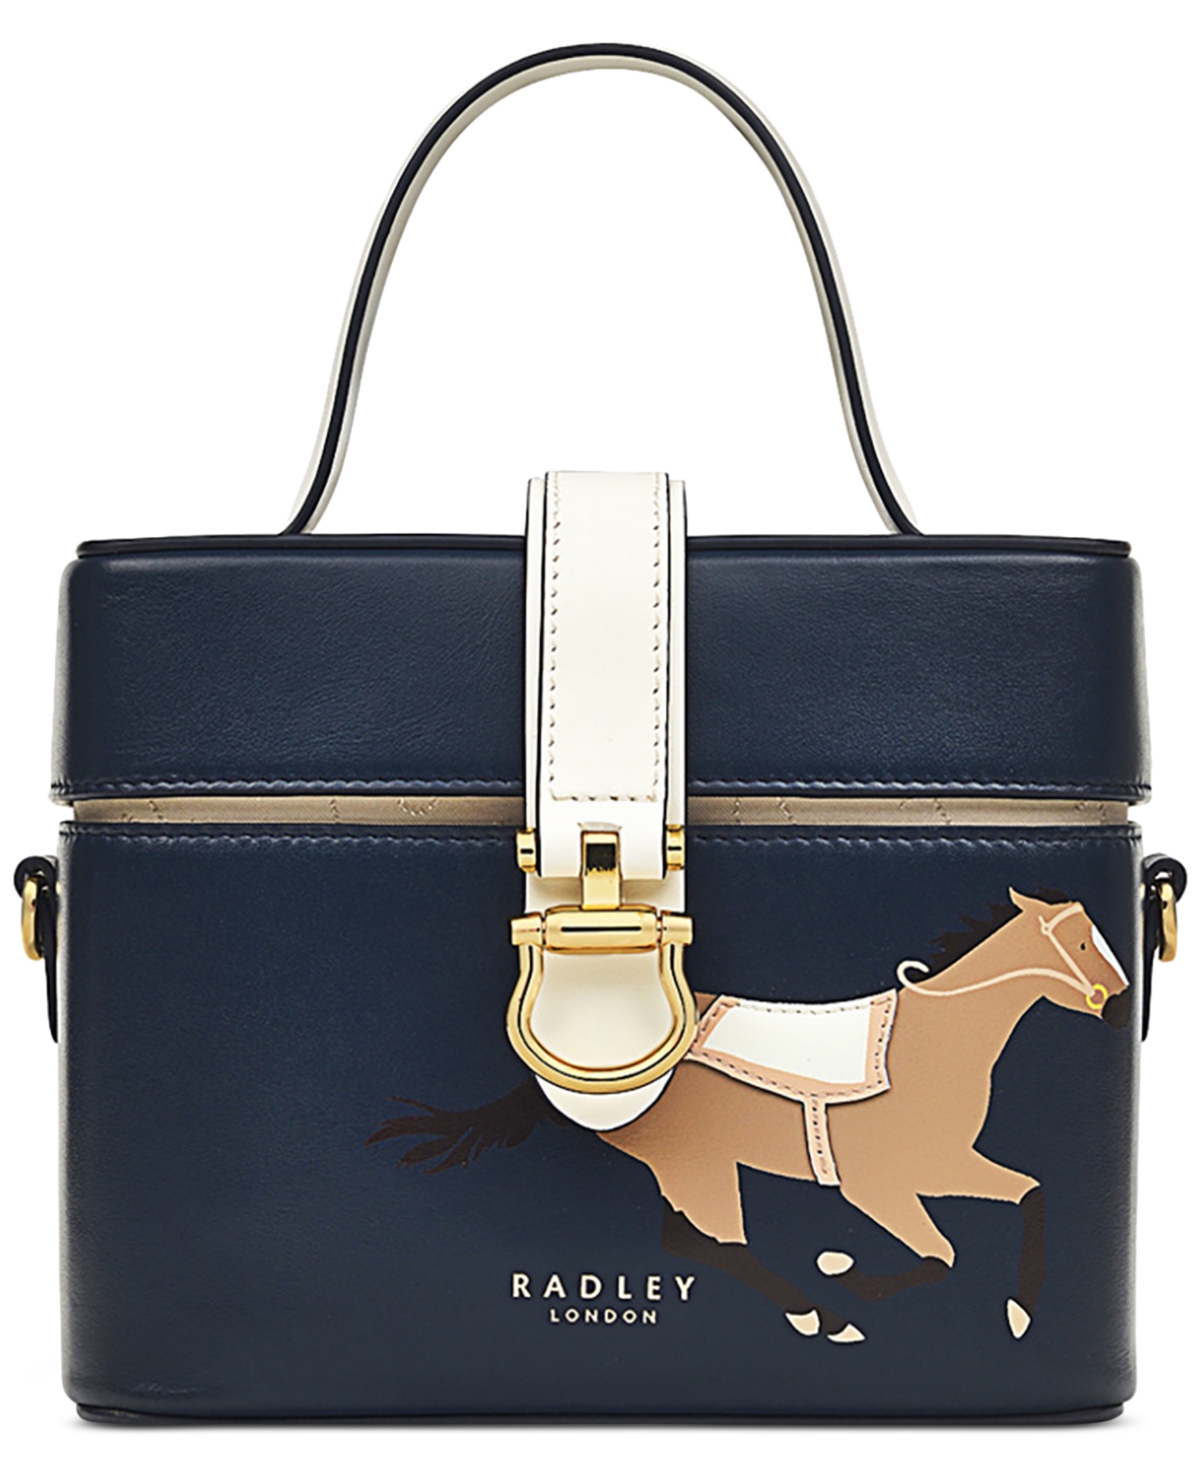 Kentucky Derby Mini Leather Flapover Shoulder Bag - Navy